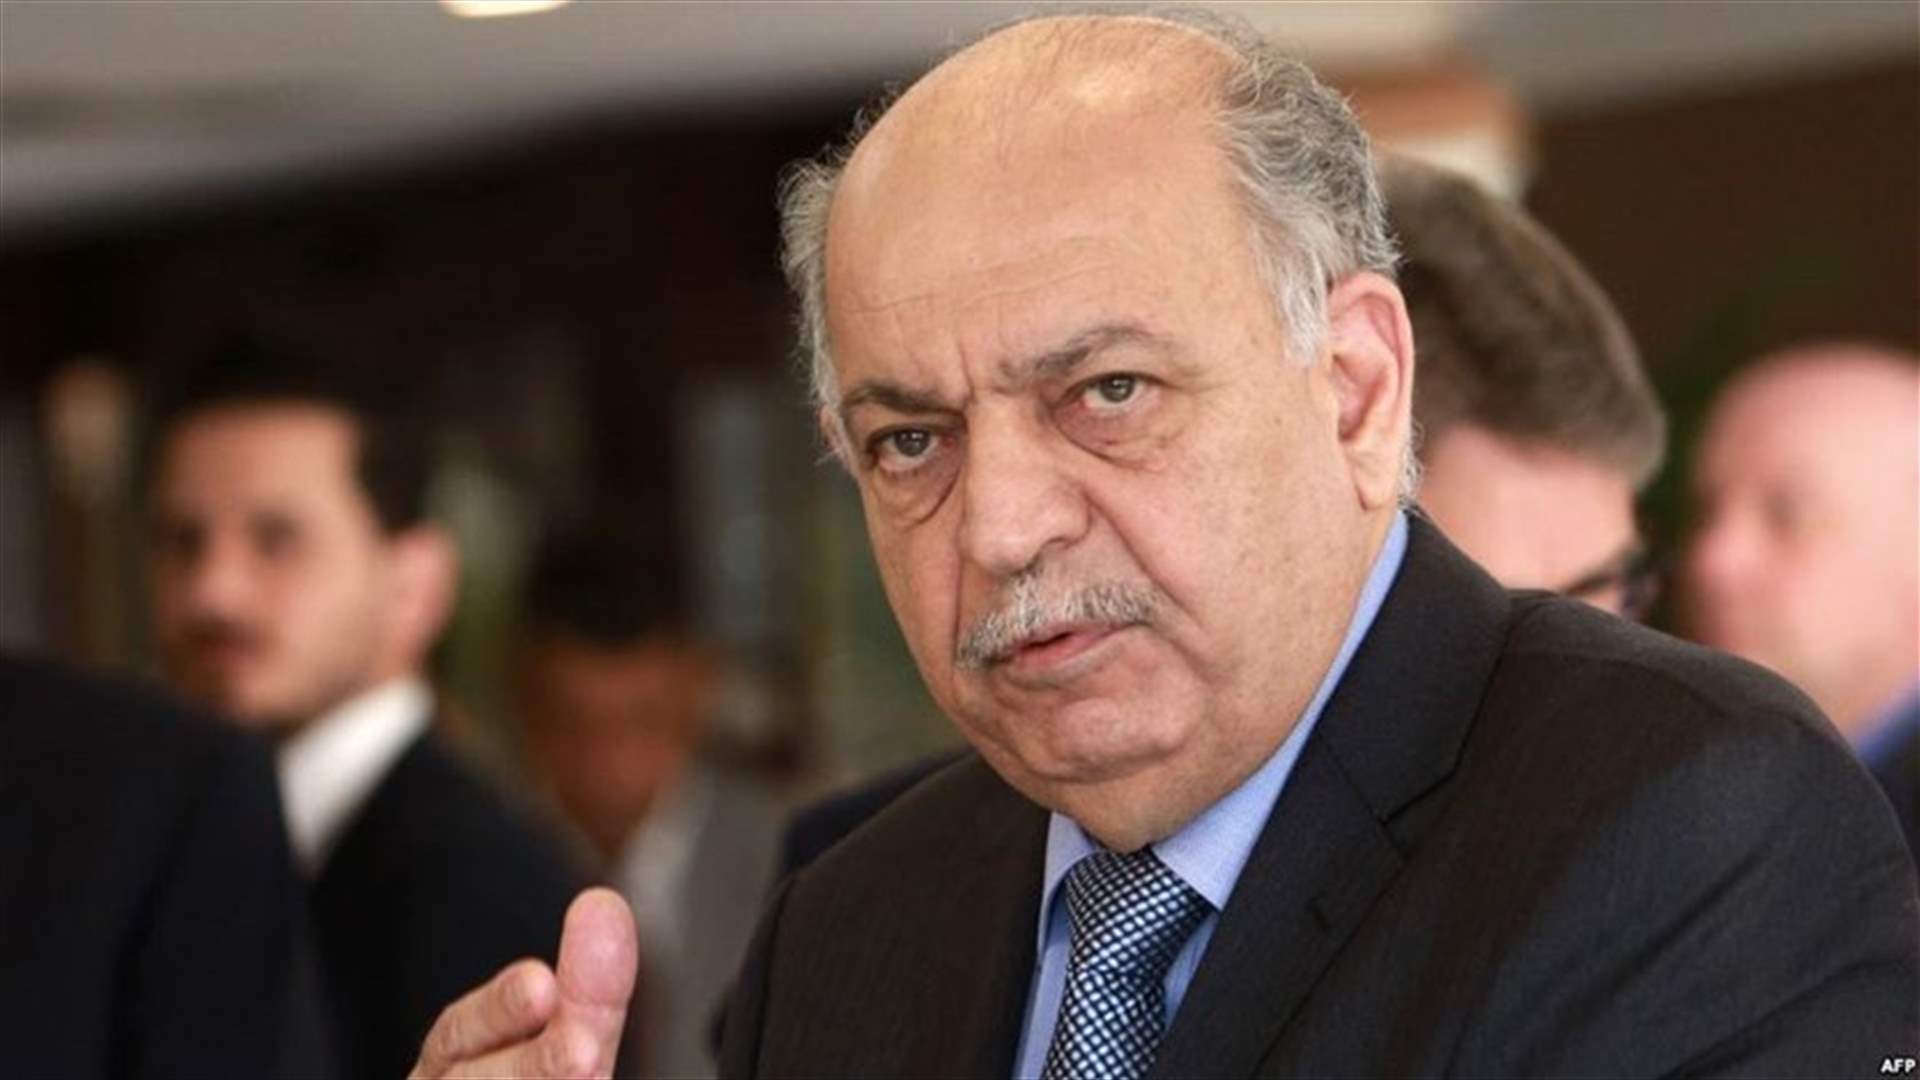 Iraq oil minister calls Exxon Mobil&#39;s evacuation of foreign staff &#39;unacceptable&#39;